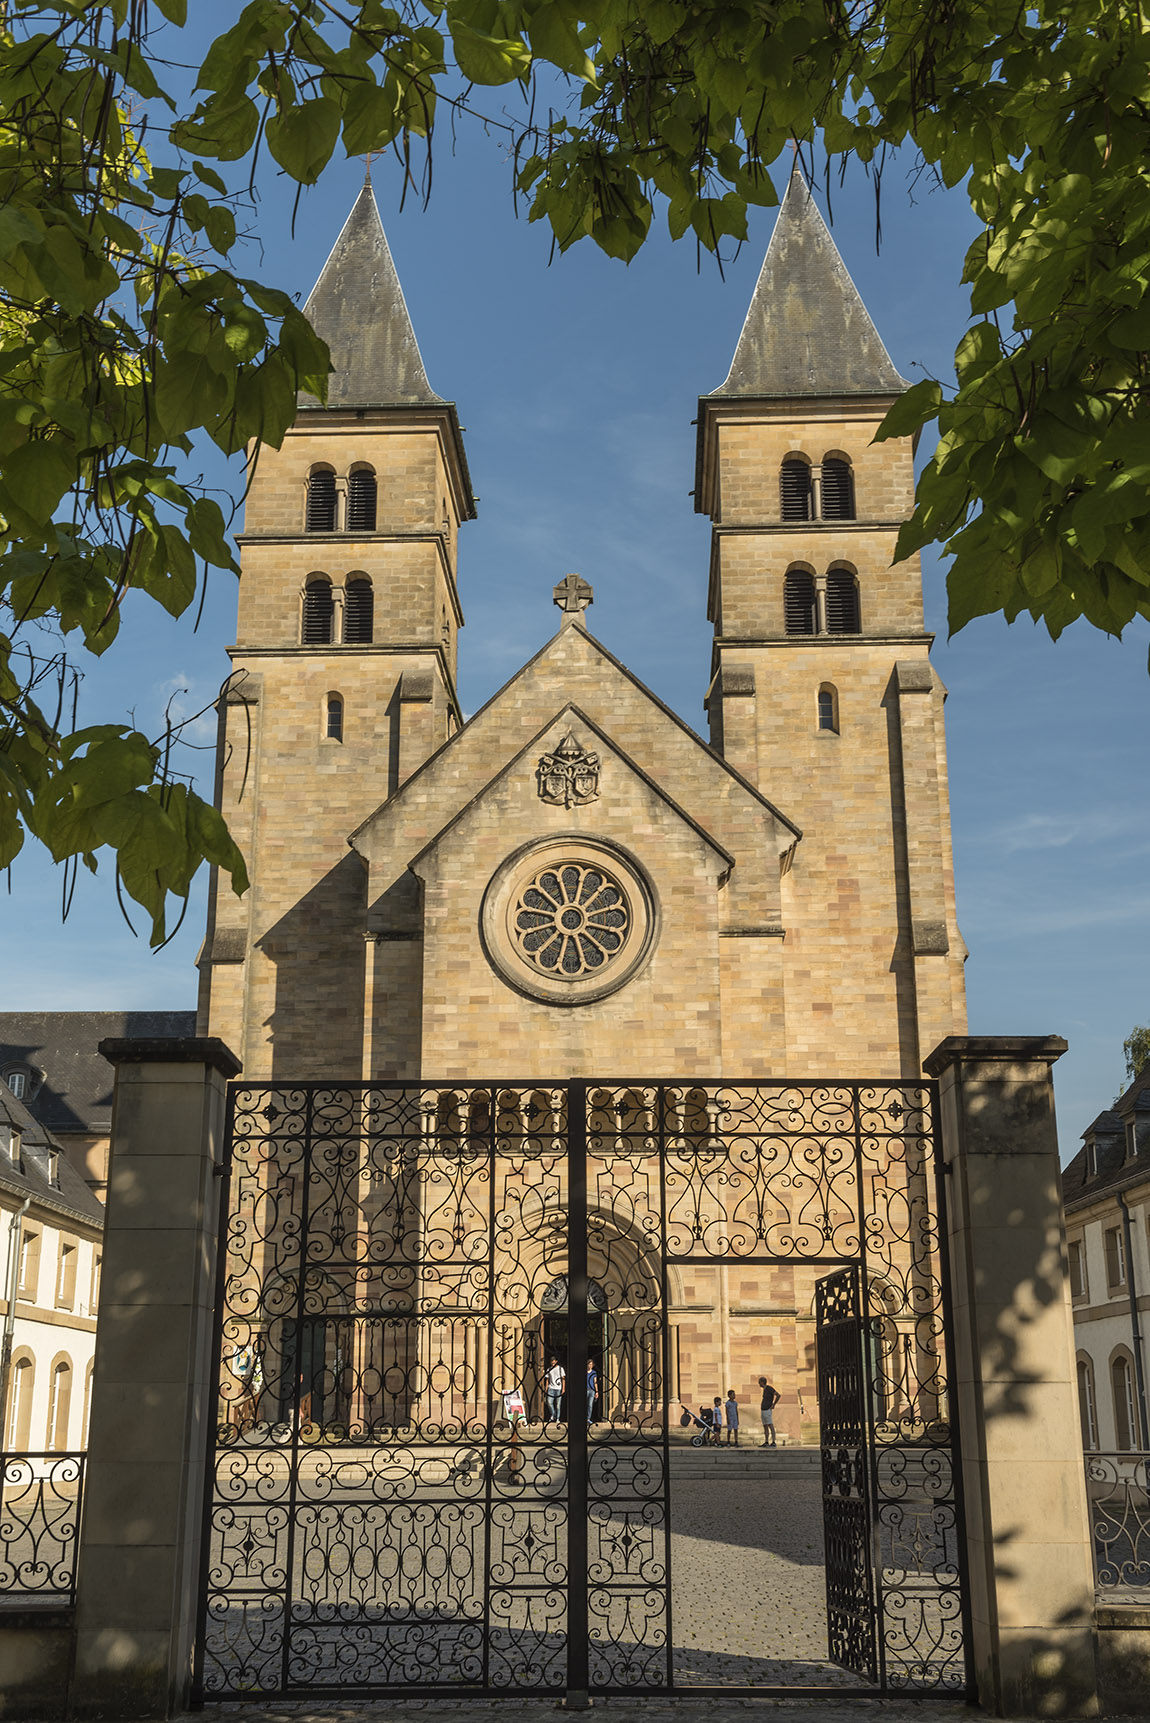 48 Hours In Luxembourg’s Oldest City